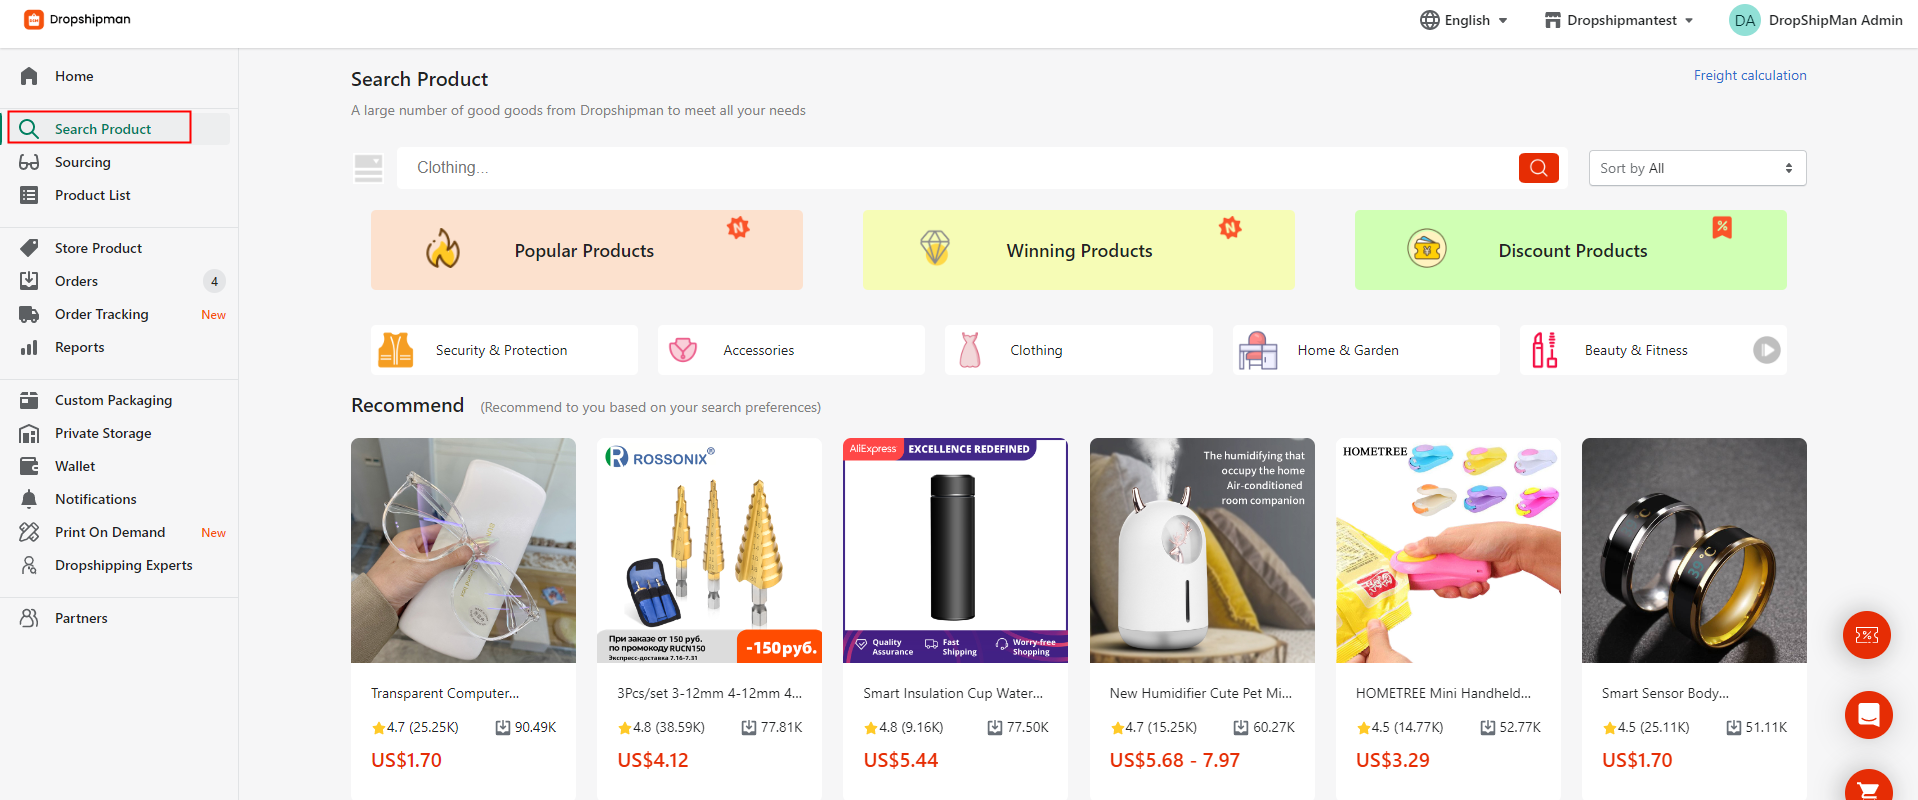 order-product-samples-with-dropshipman-step-2-add-a-sample-to-cart-method-1-search-products